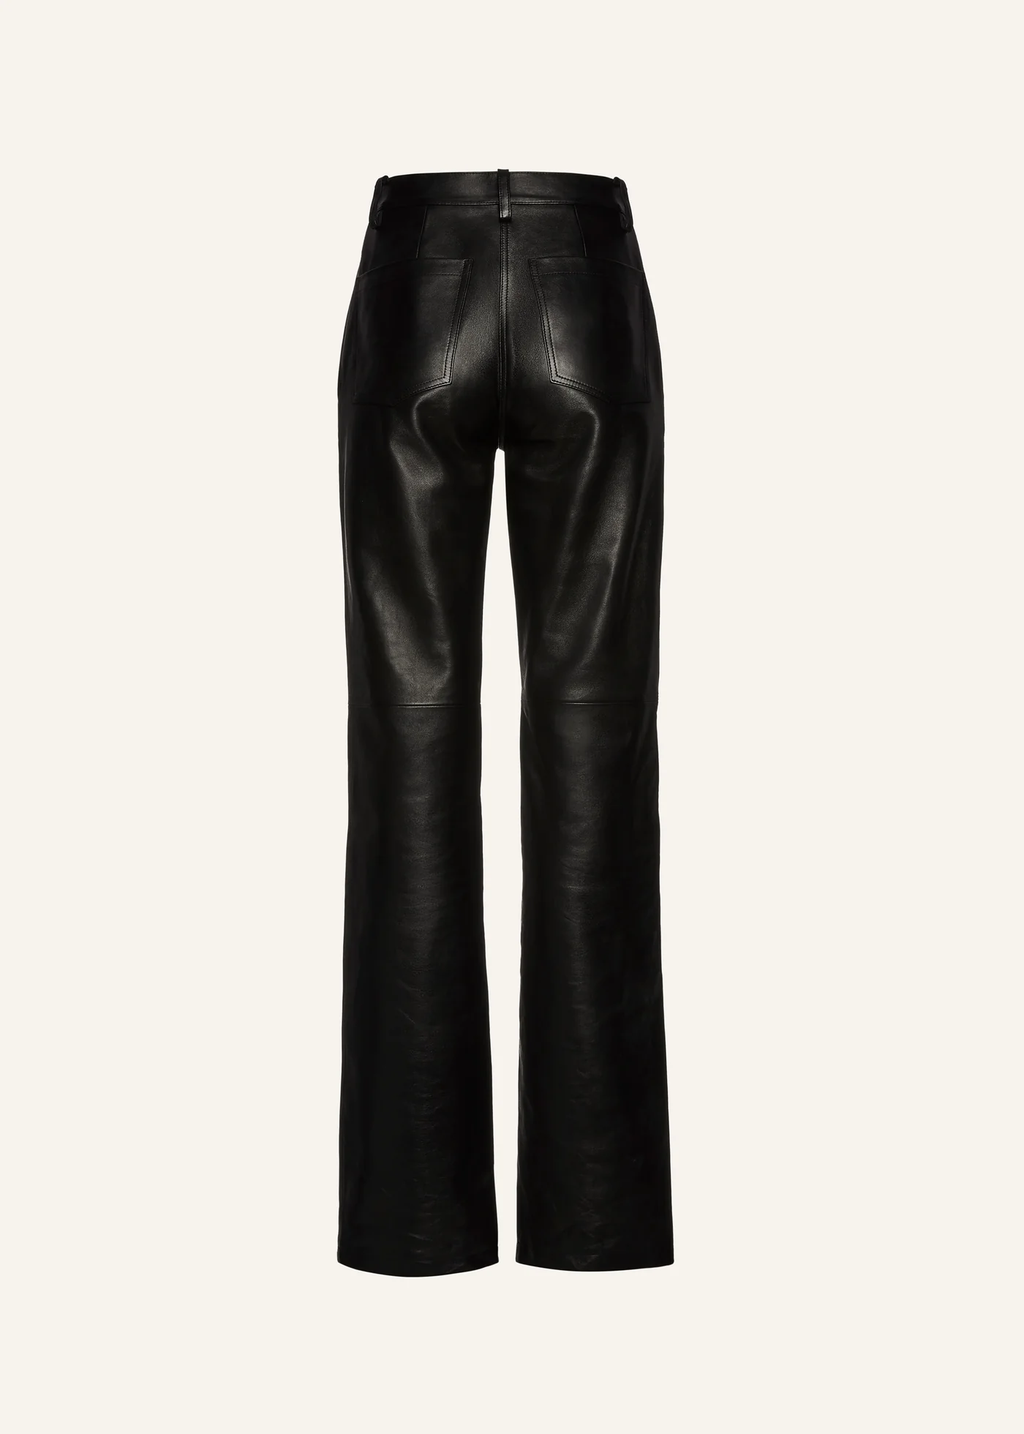 Flared Leather Black Pants